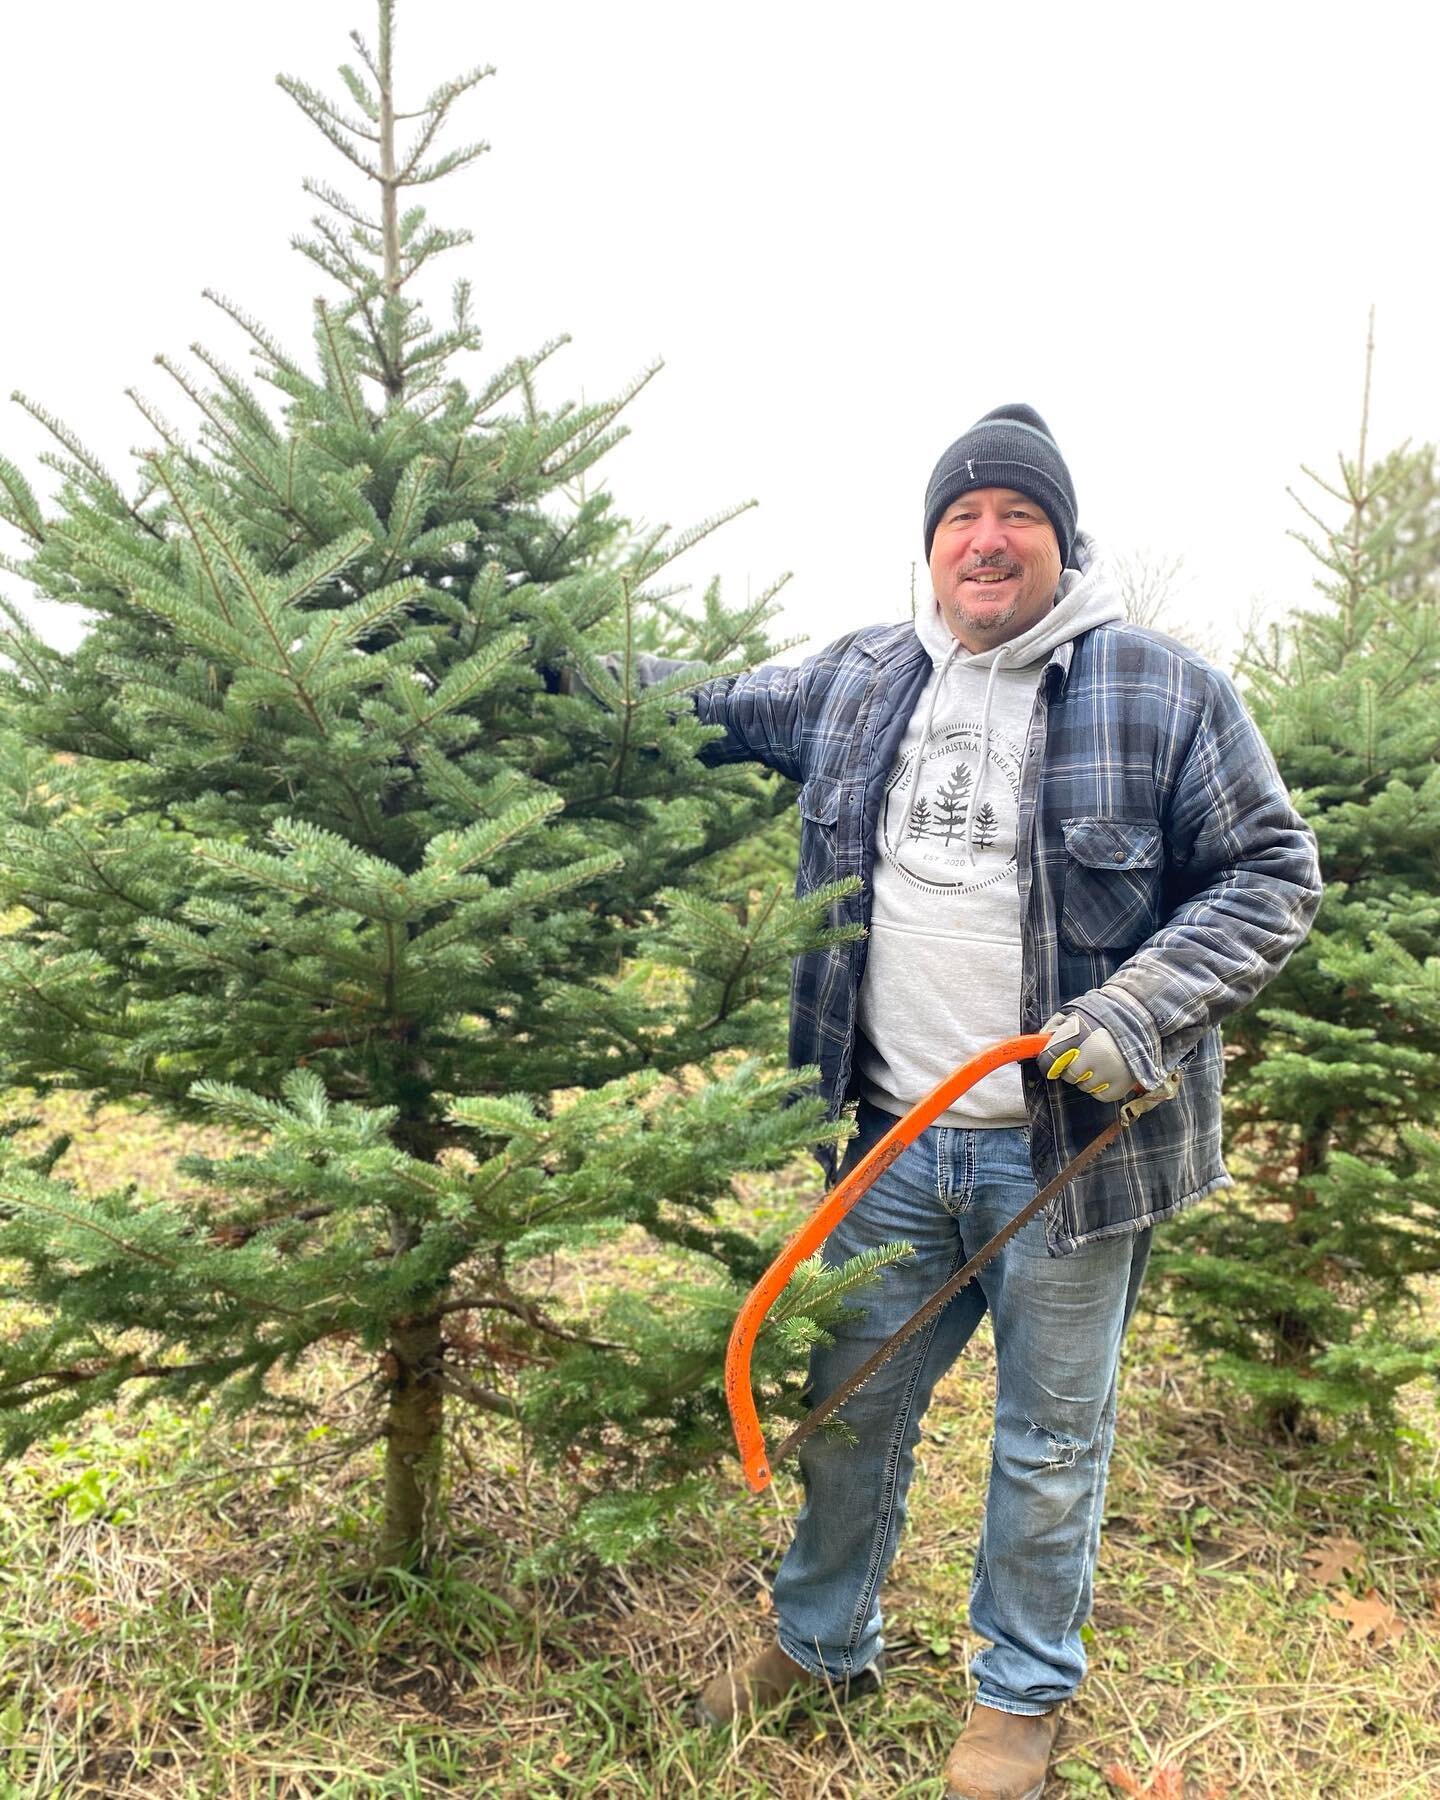 It&rsquo;s YES DAY!!

YES: Our field opens this Saturday November 26th for cutting. 9am-5pm
YES: we have Balsam and Fraser fir to cut over 8&rsquo; in the field. 
YES: we have fresh pre cut trees 
YES: there is still a tree shortage. The affects of t